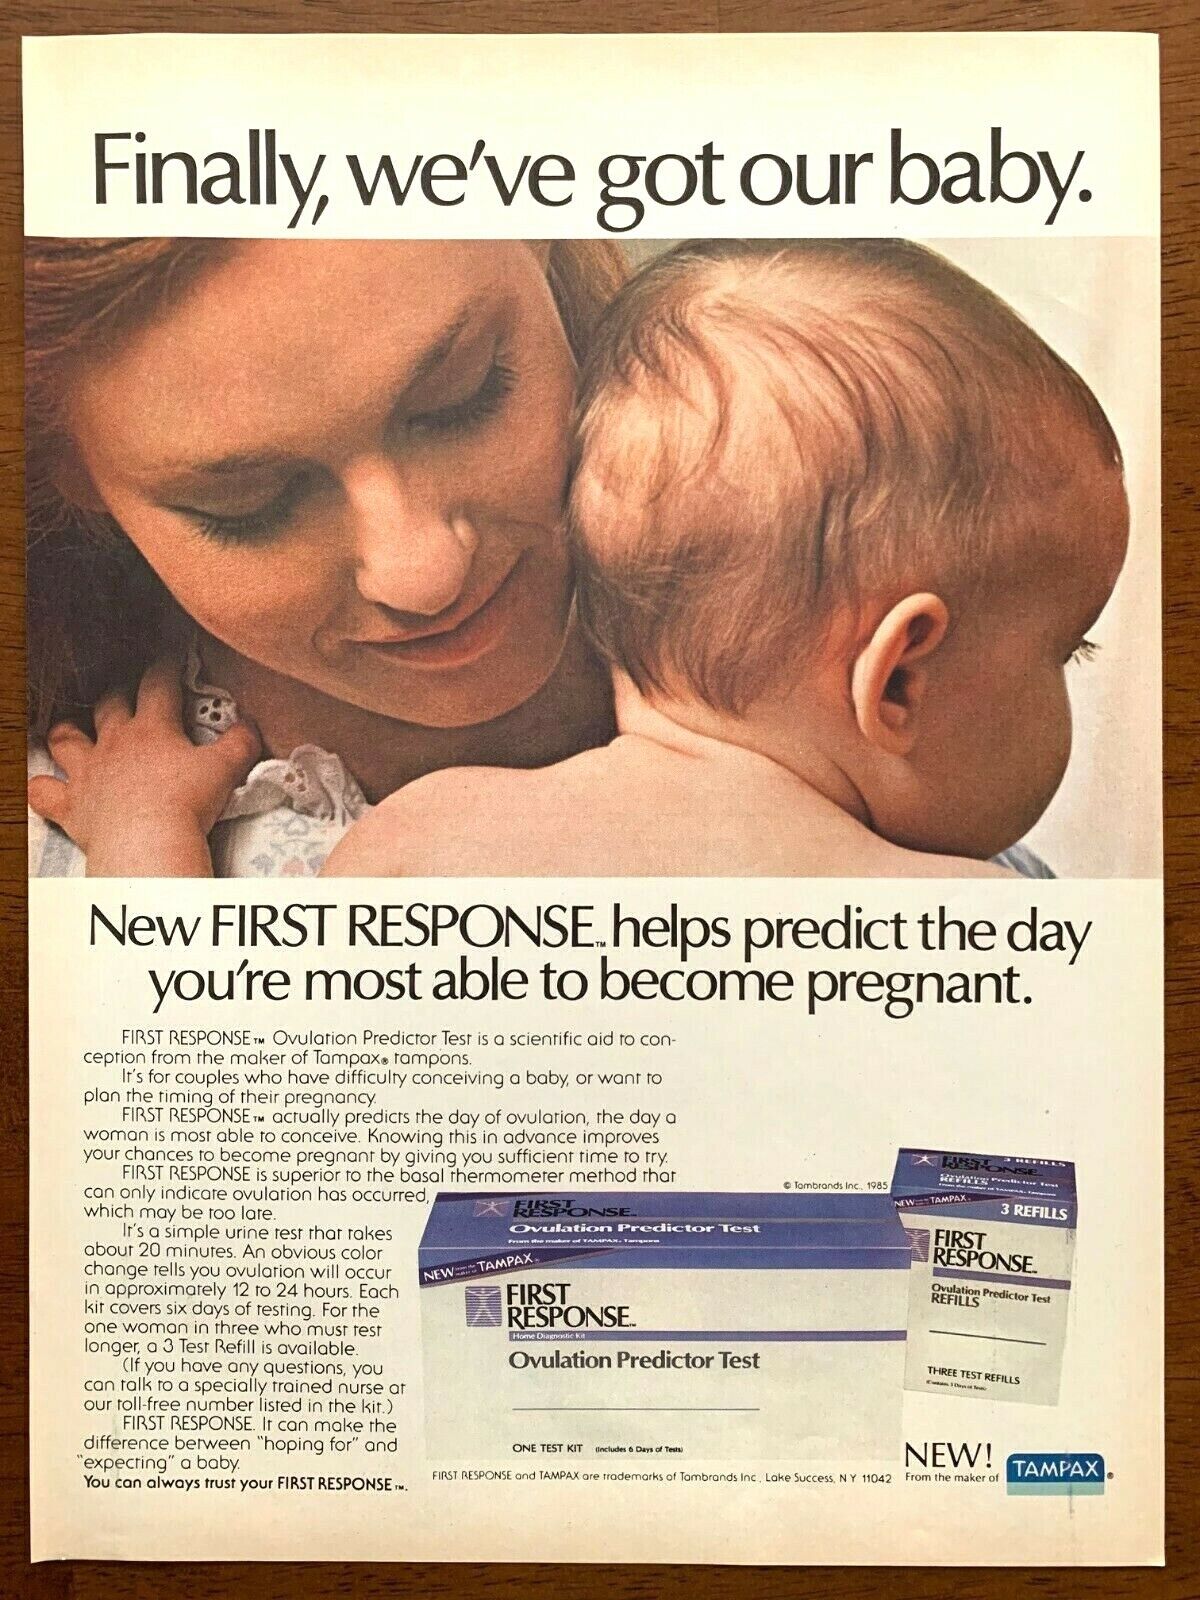 1985 Tampax First Response Vintage Print Ad/Poster Retro Pregnancy Baby Décor 